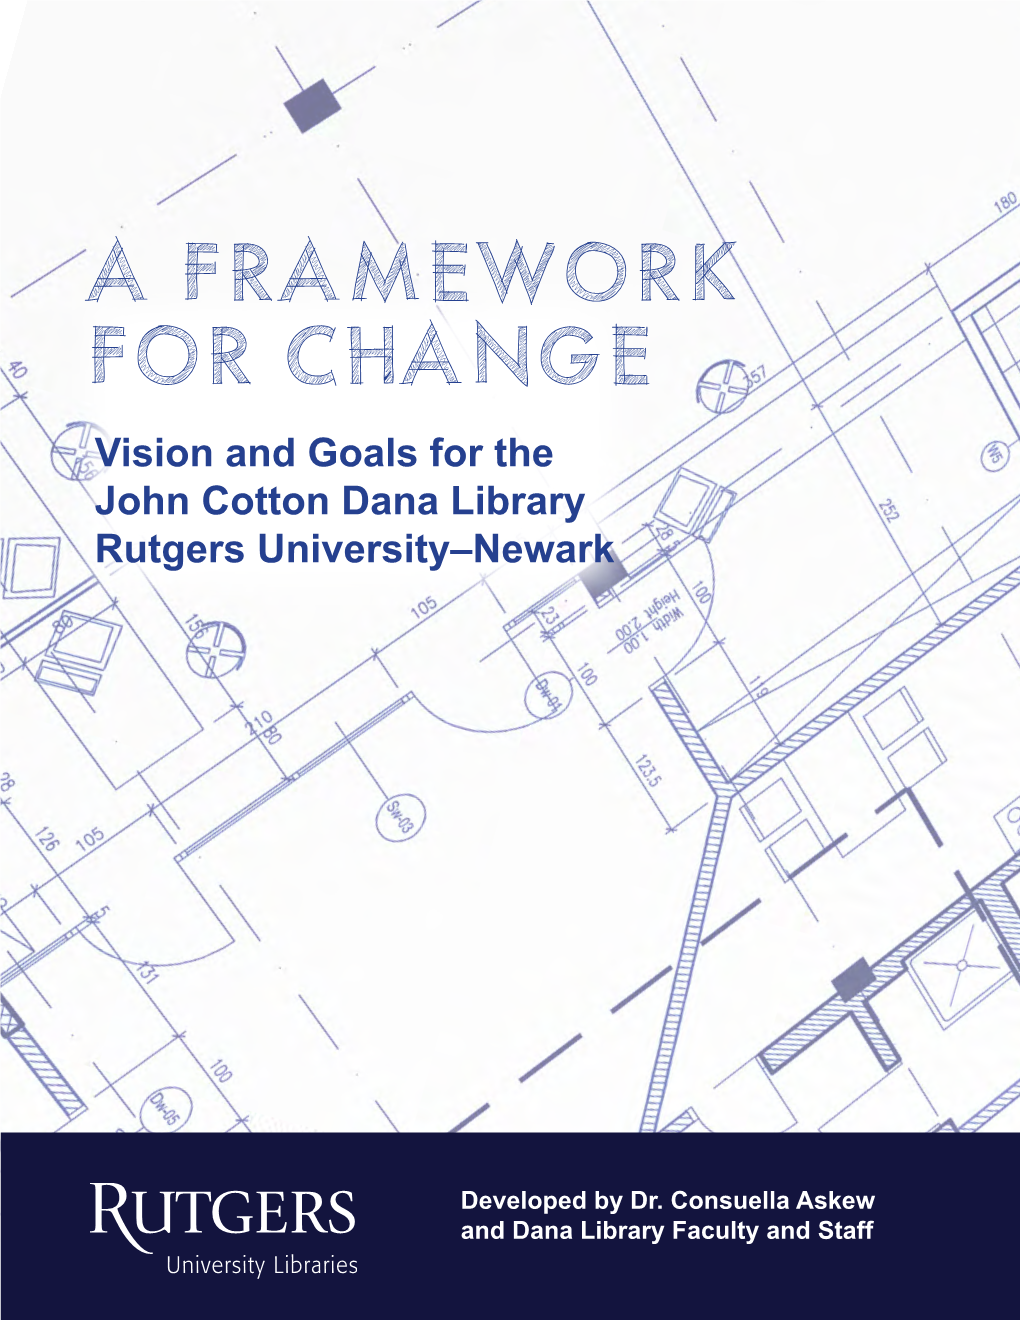 Visions and Goals for the John Cotton Dana Library